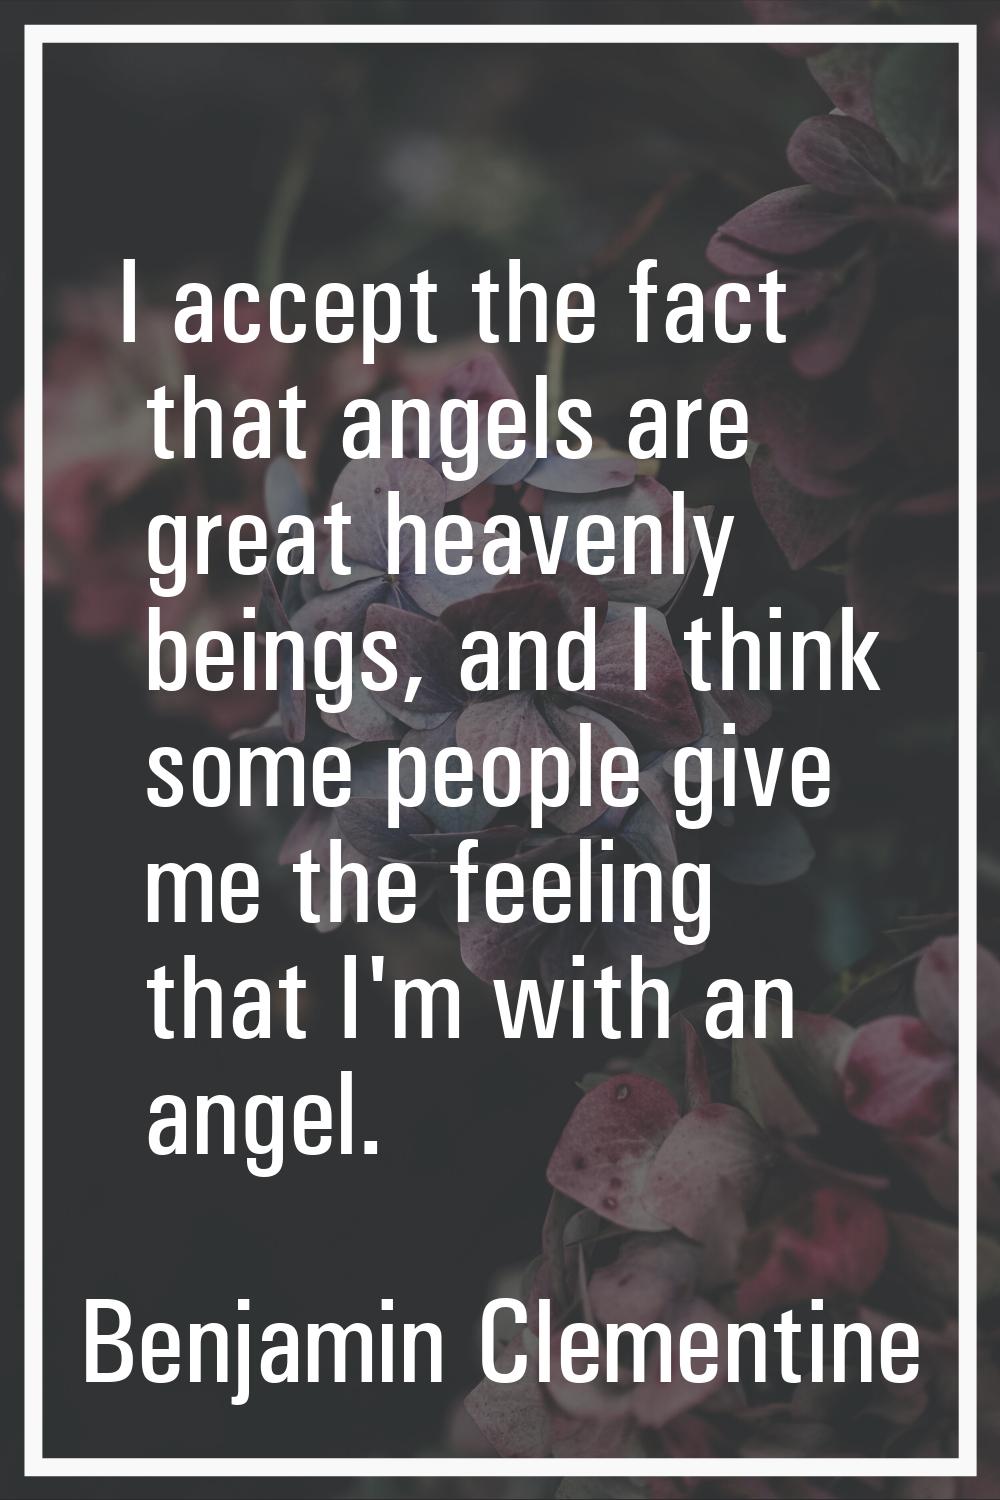 I accept the fact that angels are great heavenly beings, and I think some people give me the feelin